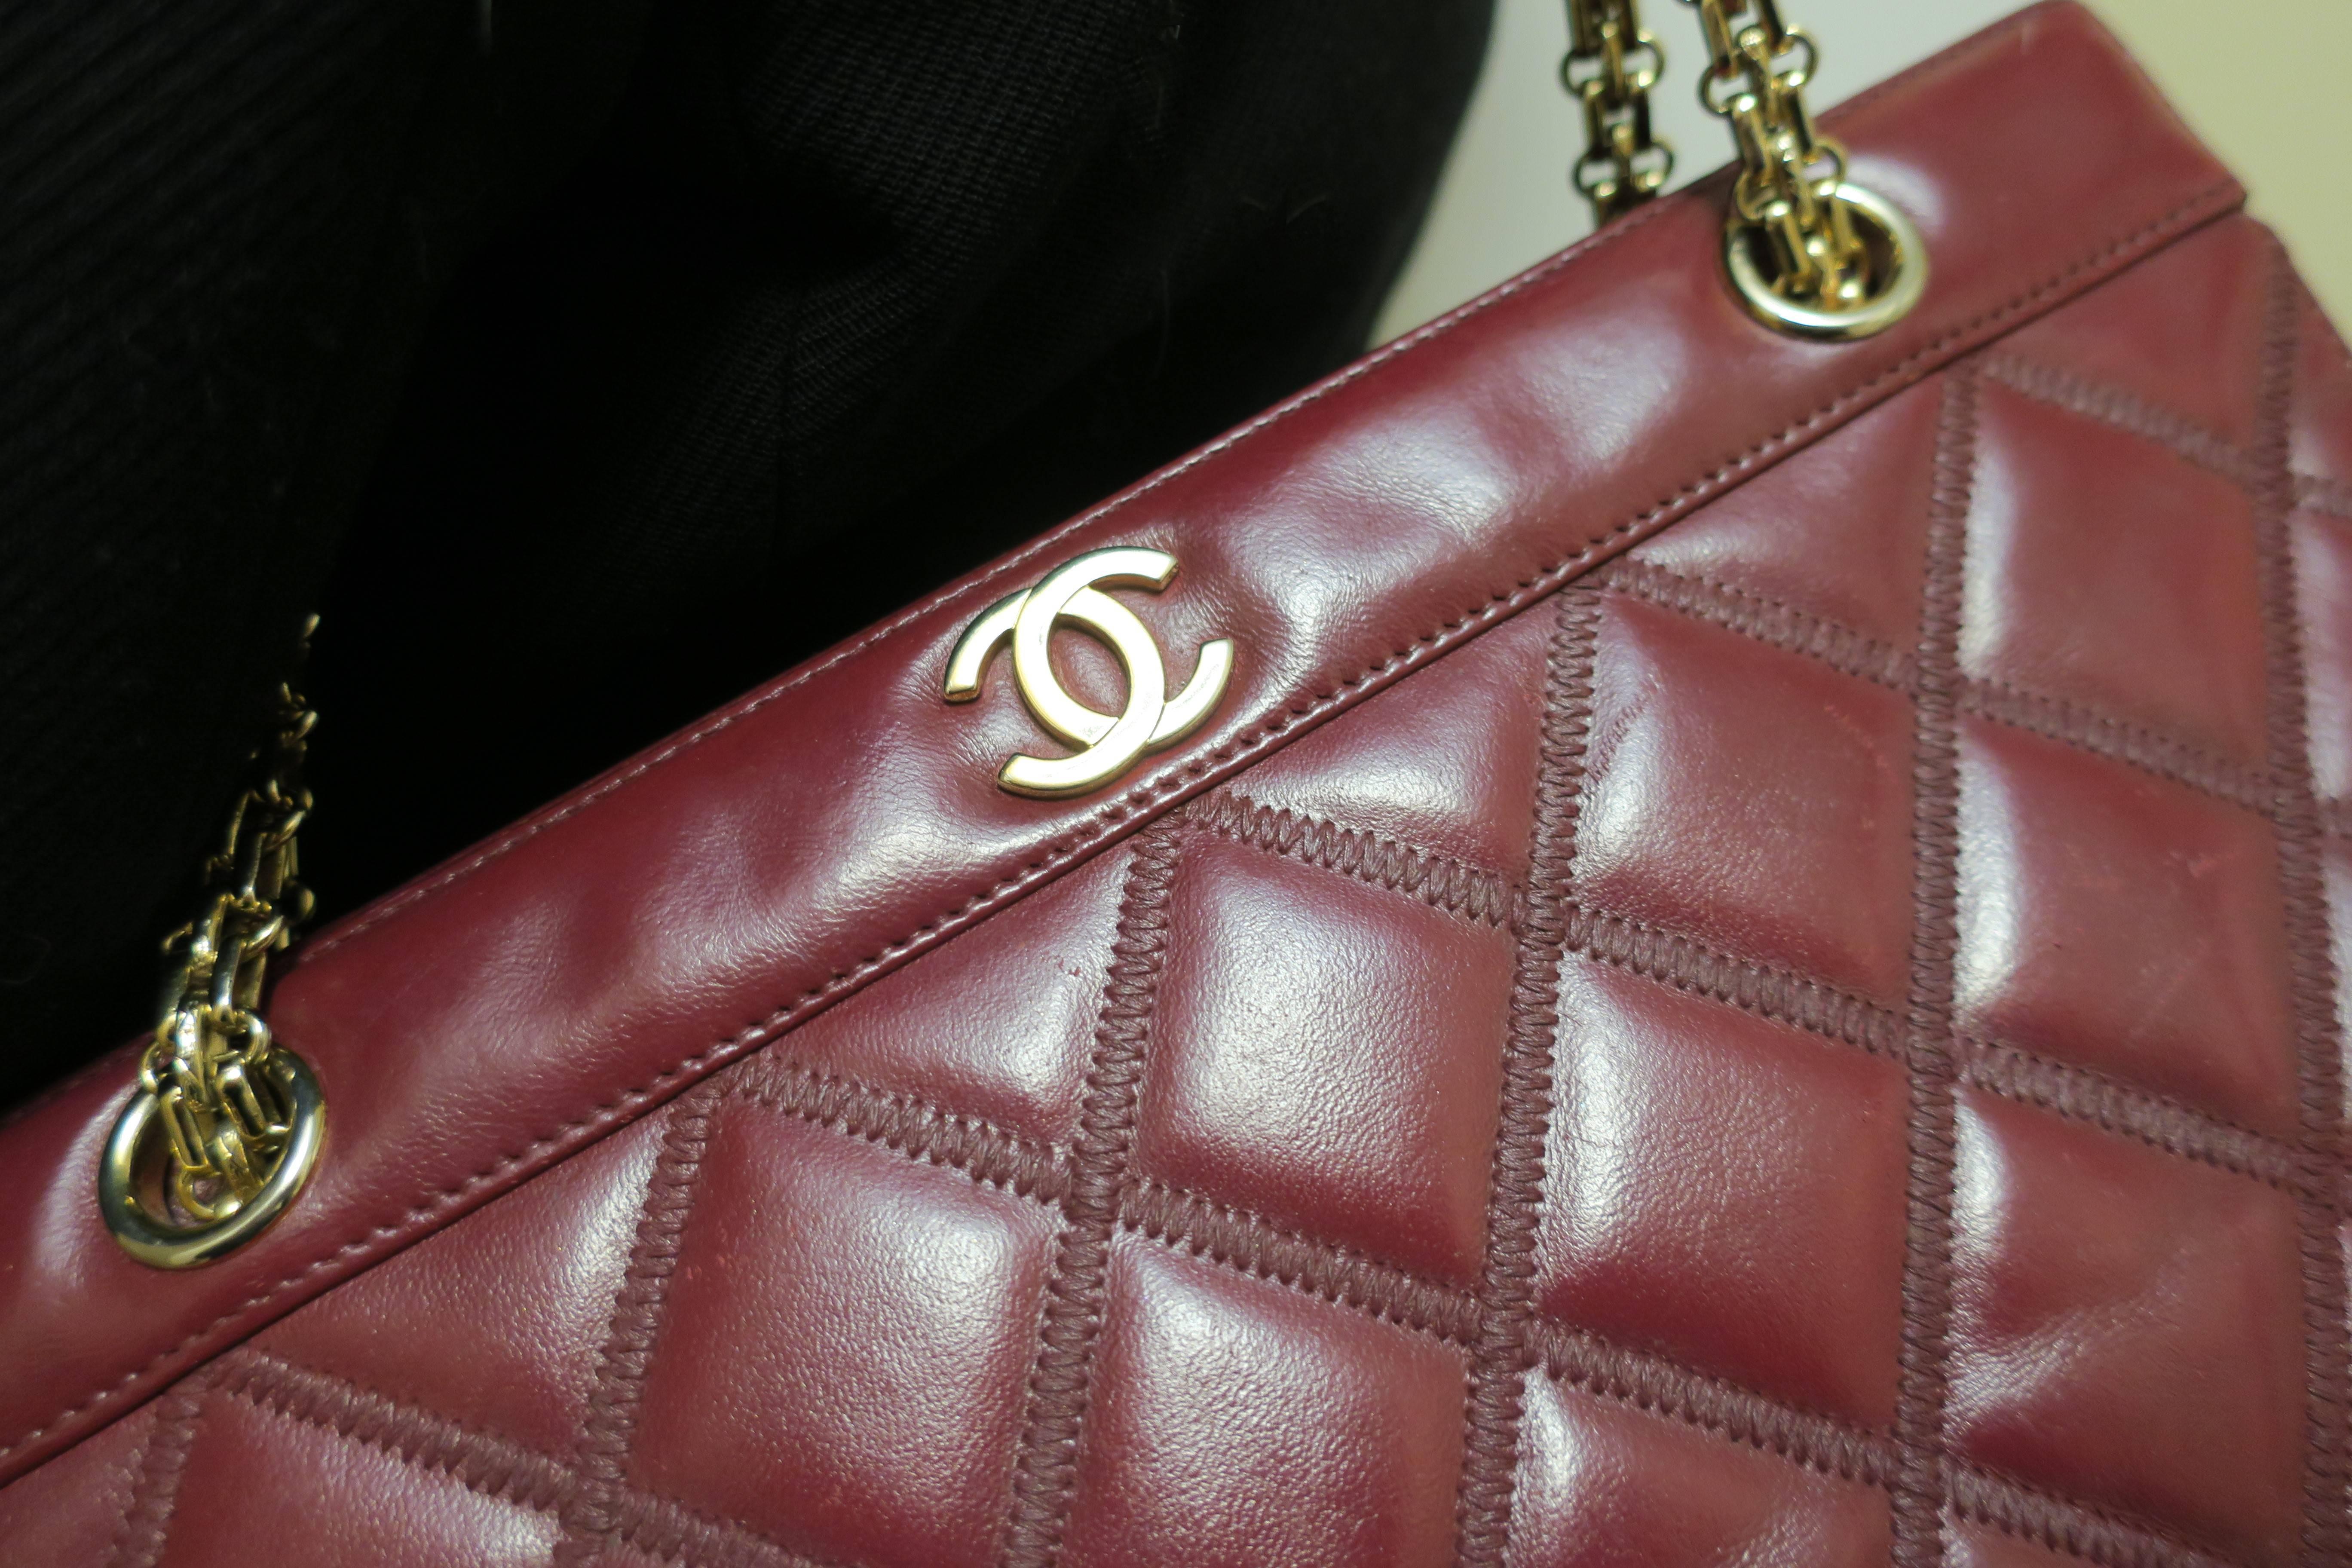 Plated Chanel Burgundy Red Leather Bag